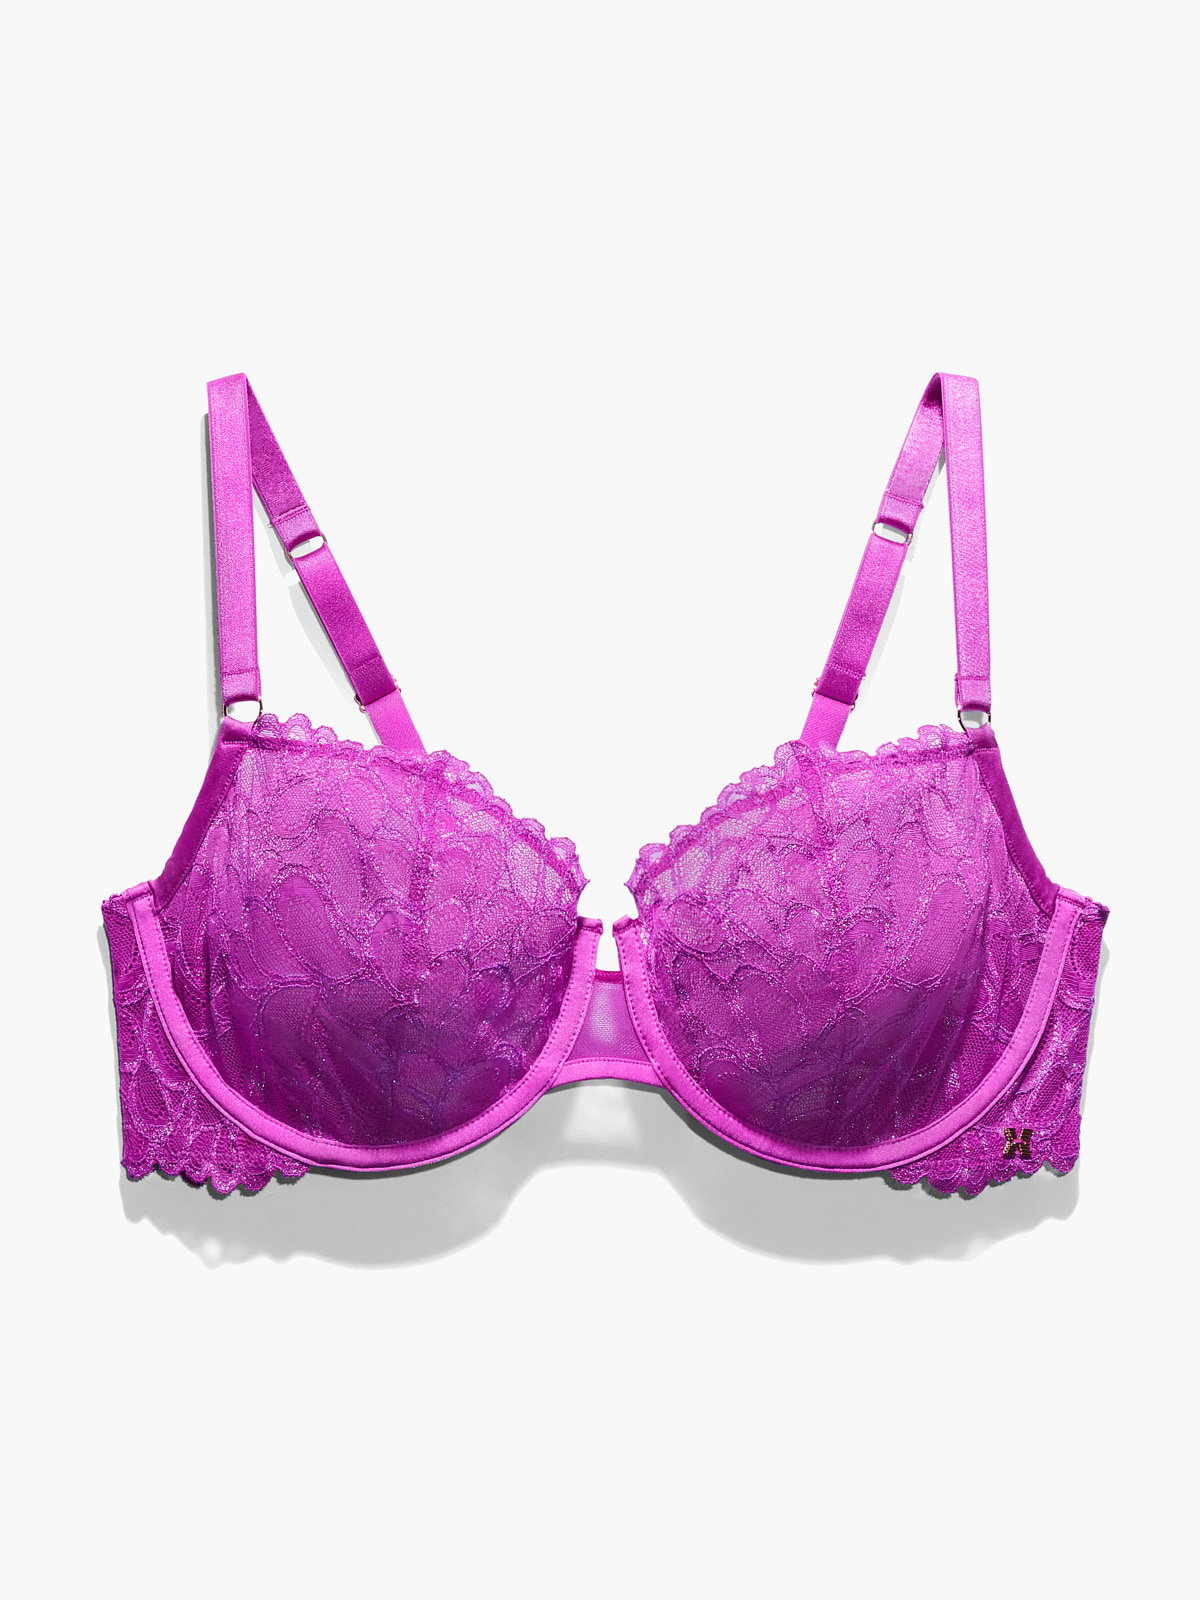 https://cdn.savagex.com/media/images/products/BA2042991-5162/SAVAGE-NOT-SORRY-UNLINED-LACE-BALCONETTE-BRA-BA2042991-5162-LAYDOWN-1200x1600.jpg